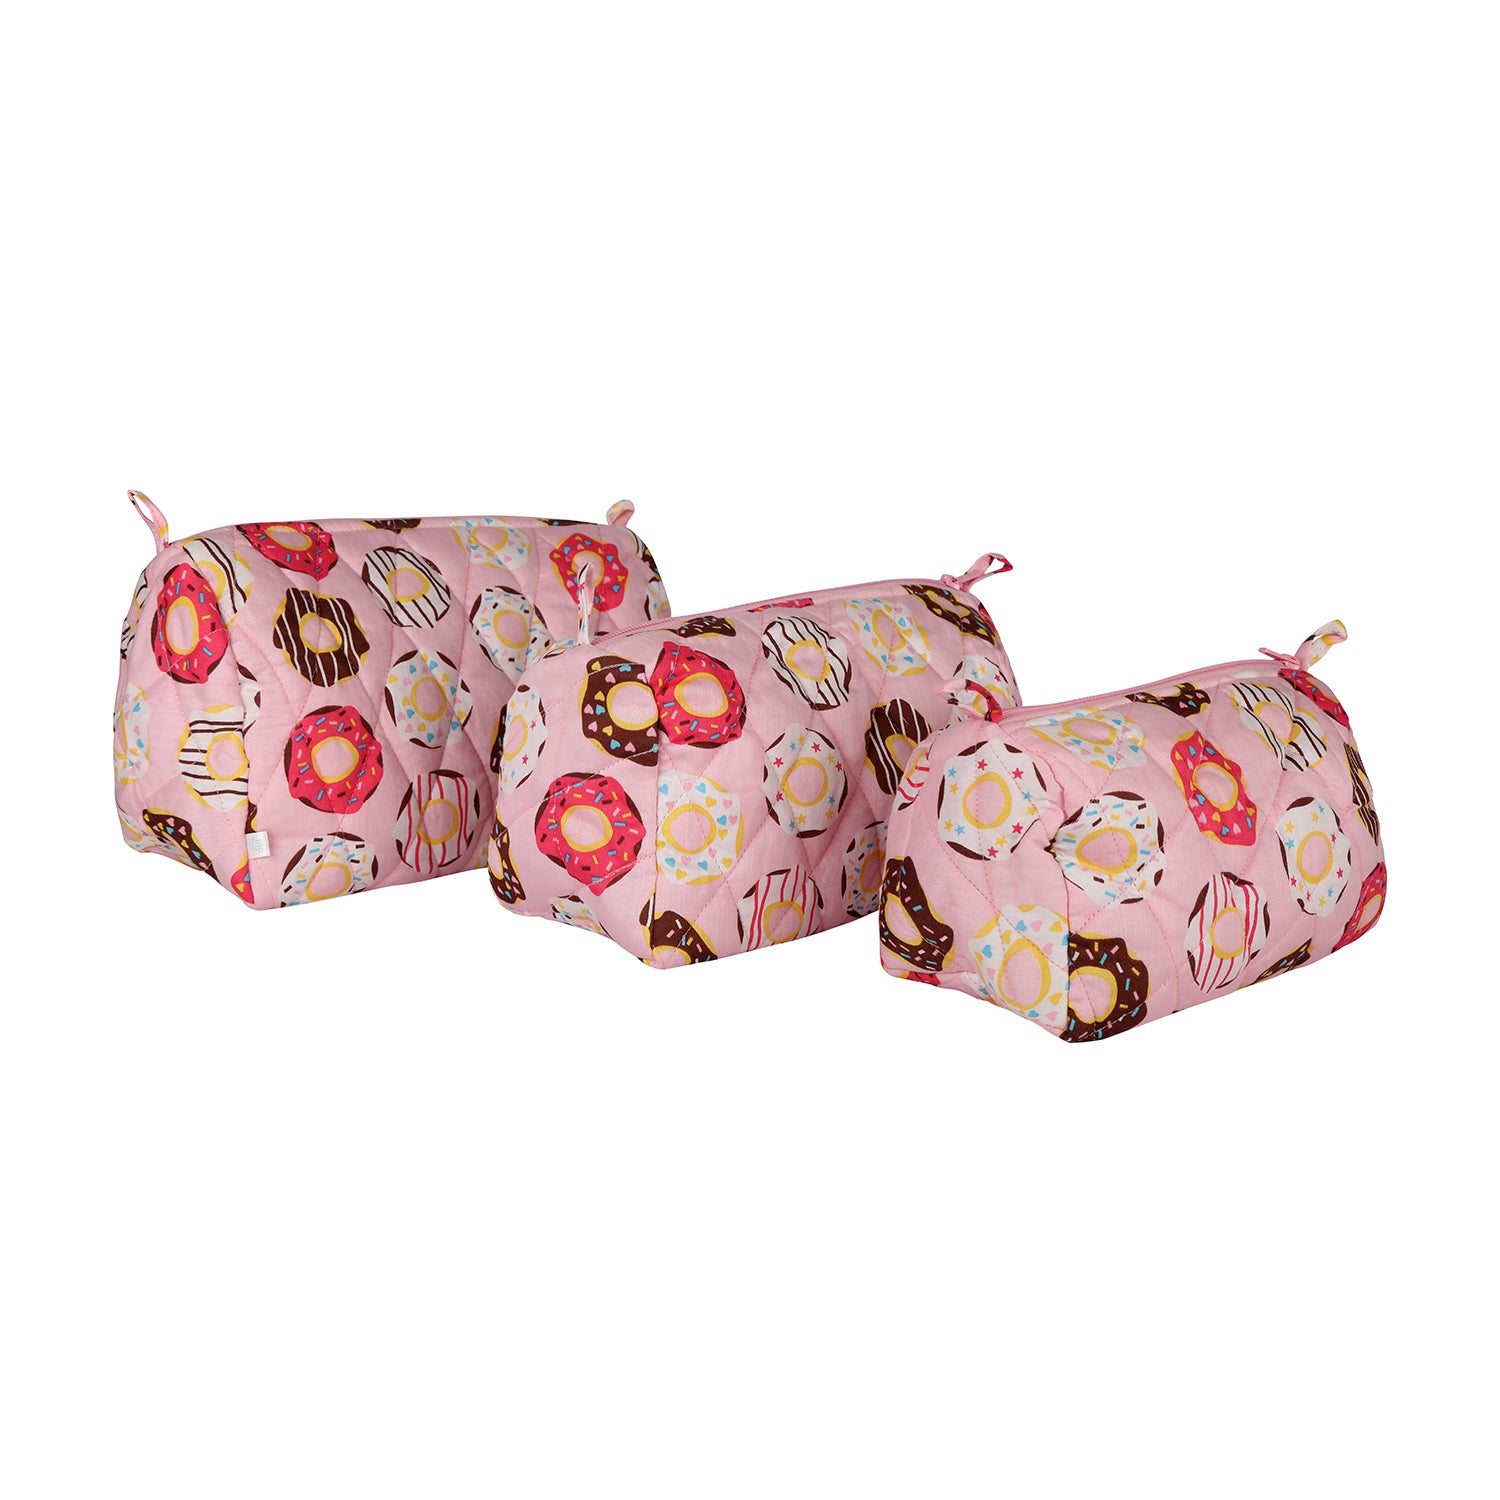 Pouch Set - Donuts (Set of 3)